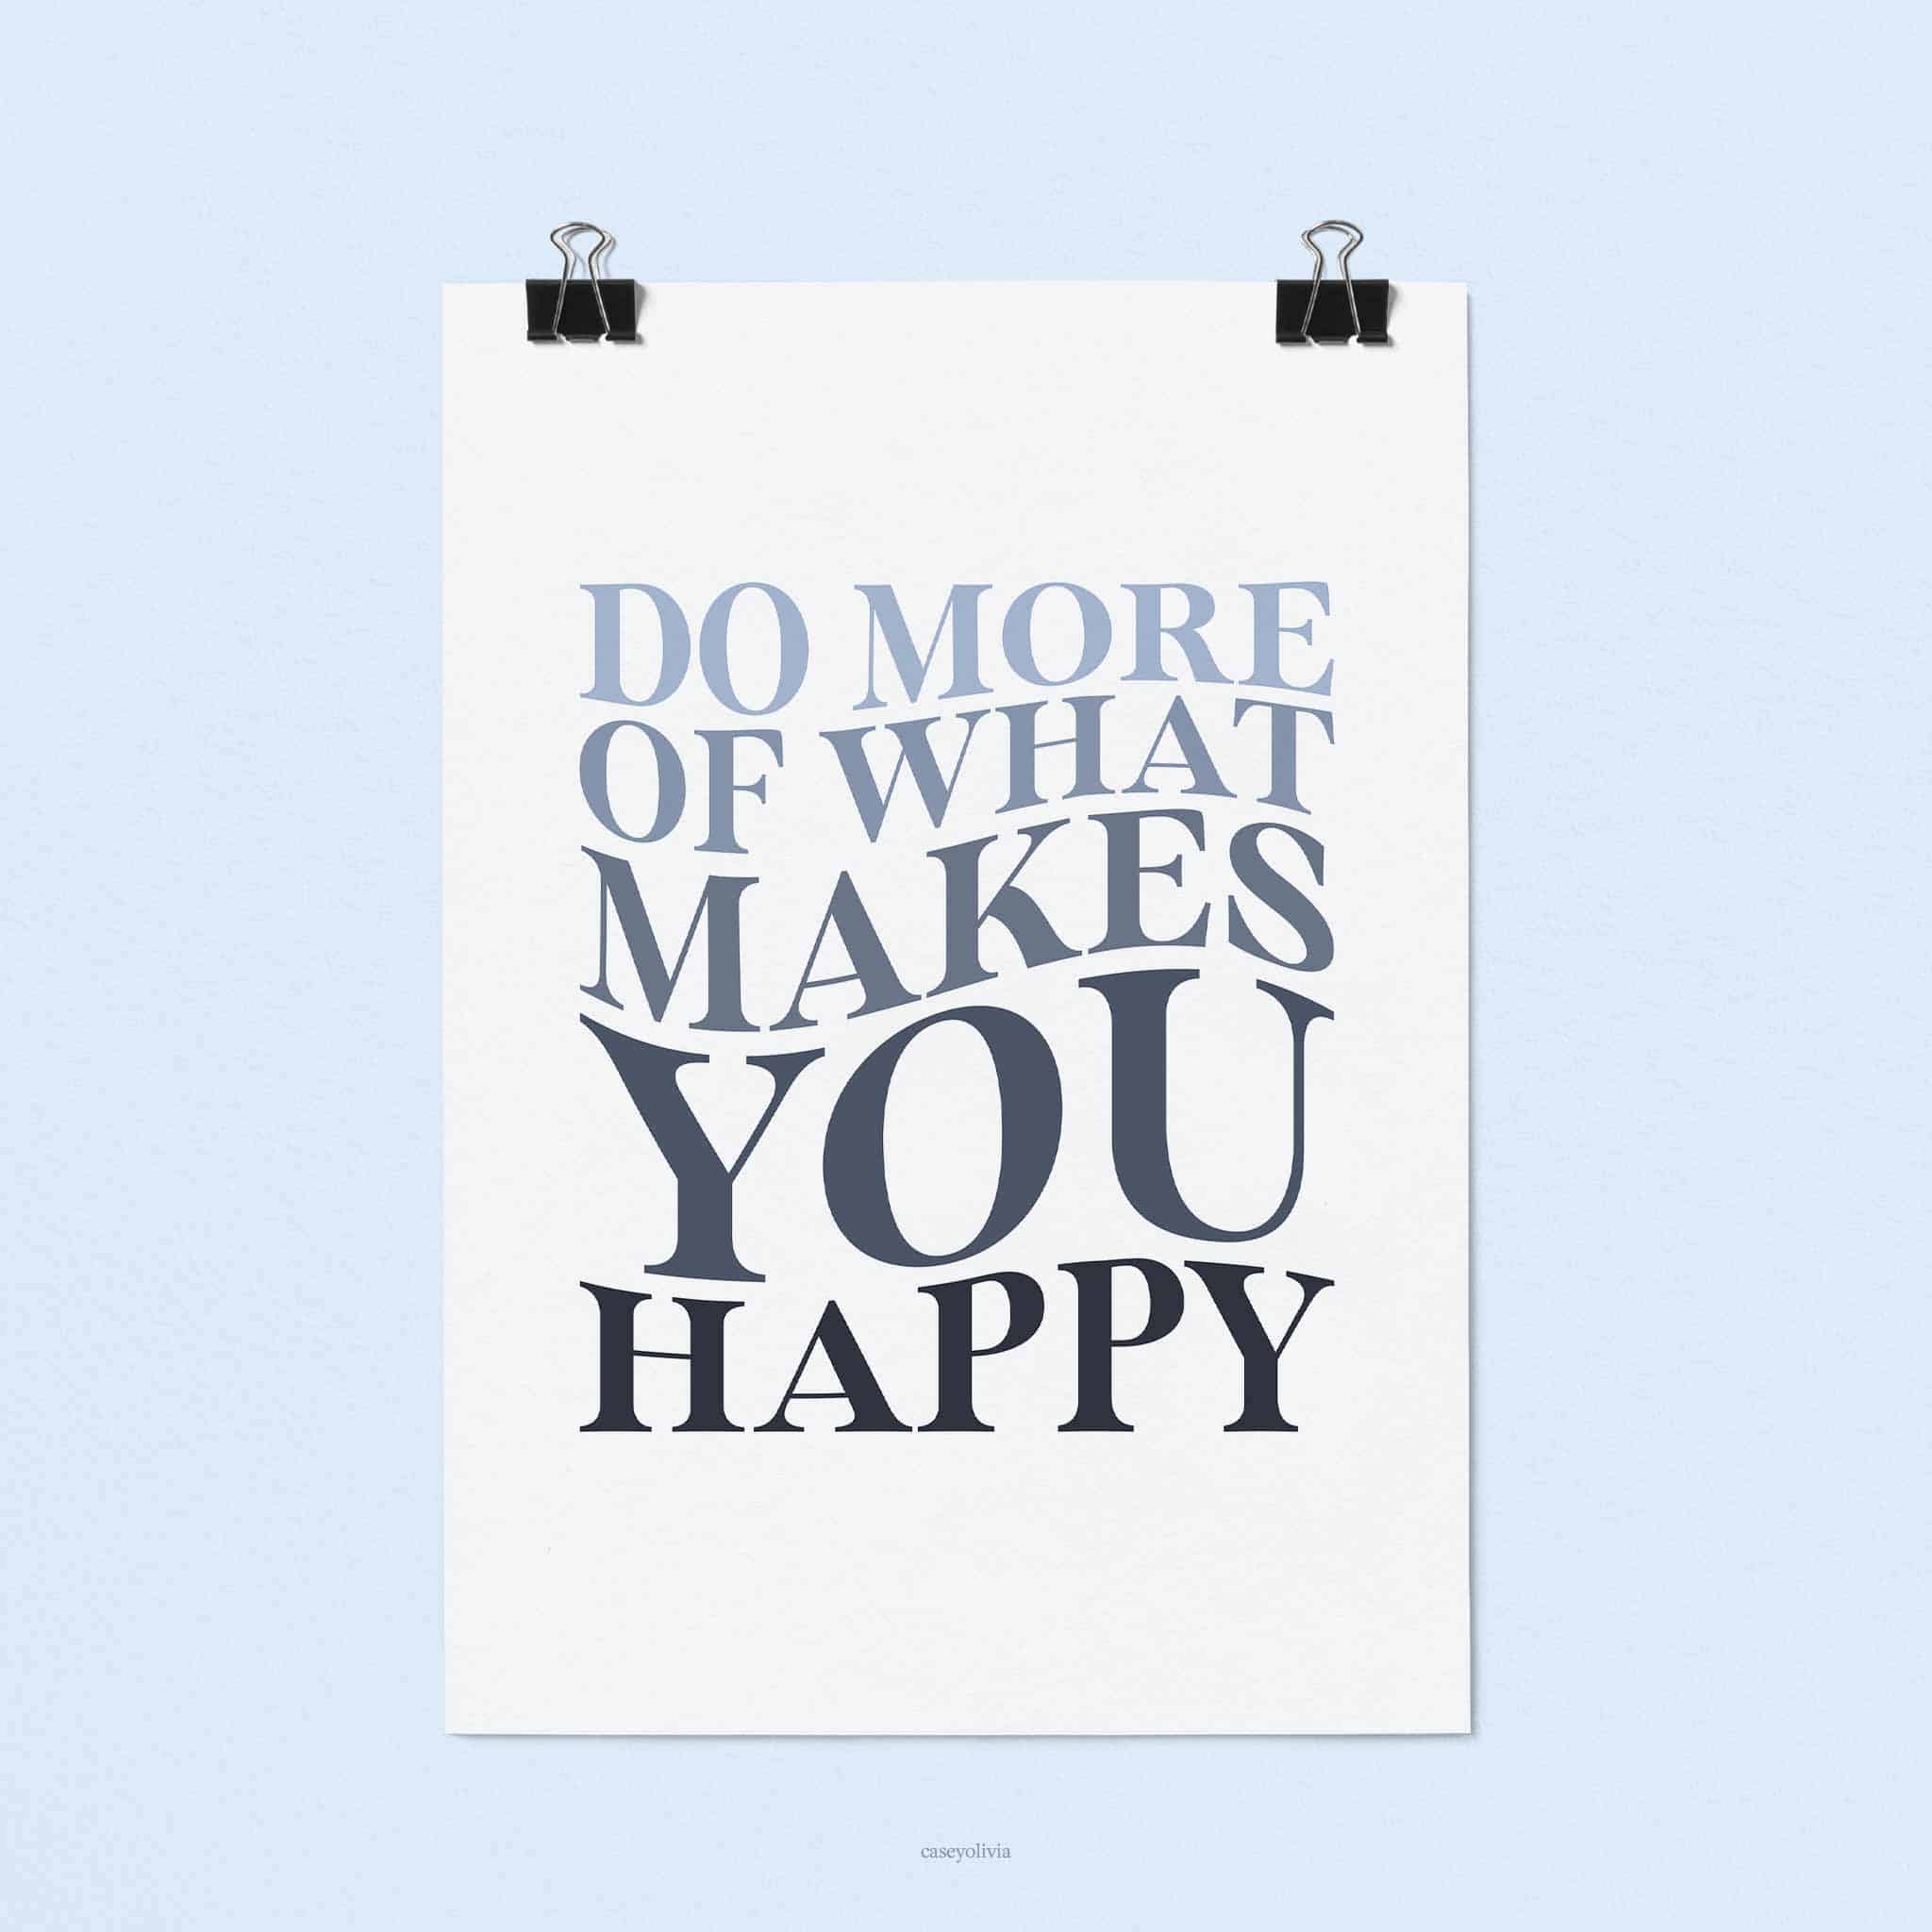 positivity poster print about doing what makes you happier in life